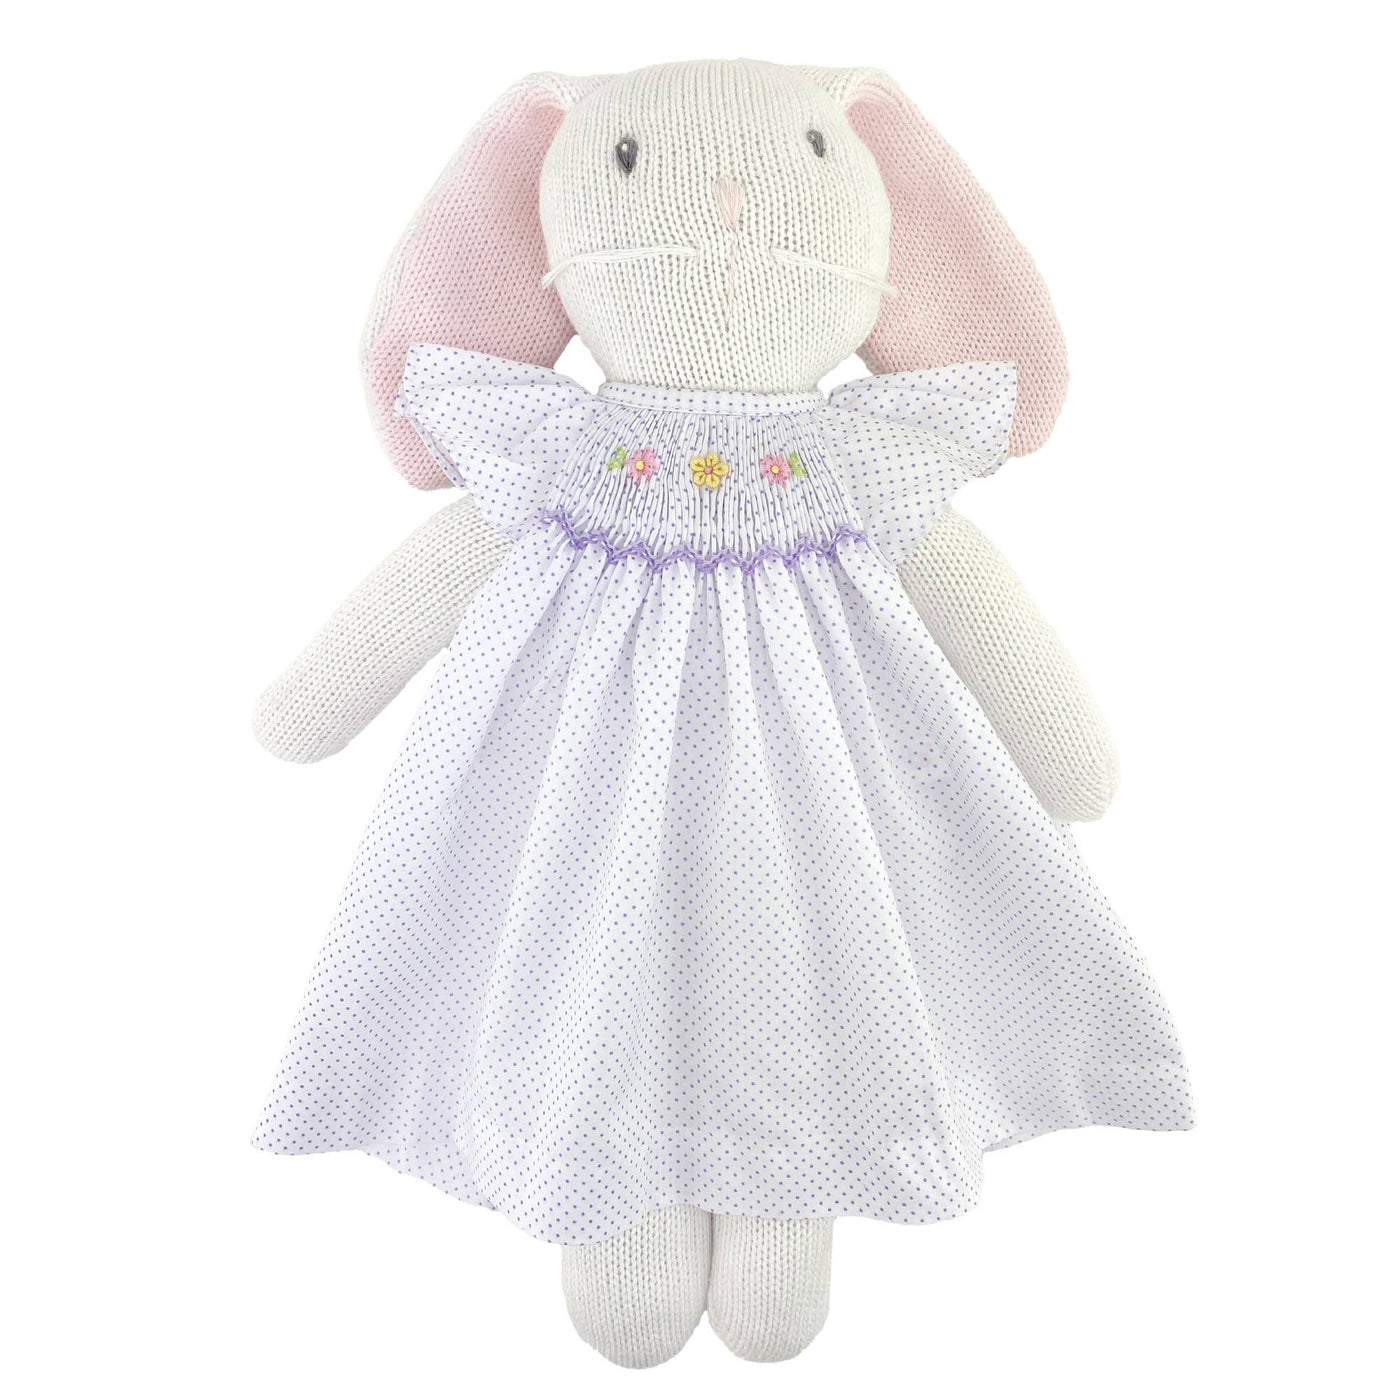 Petit Ami & Zubels - Knit Bunny Doll with Lavender Dot Dress